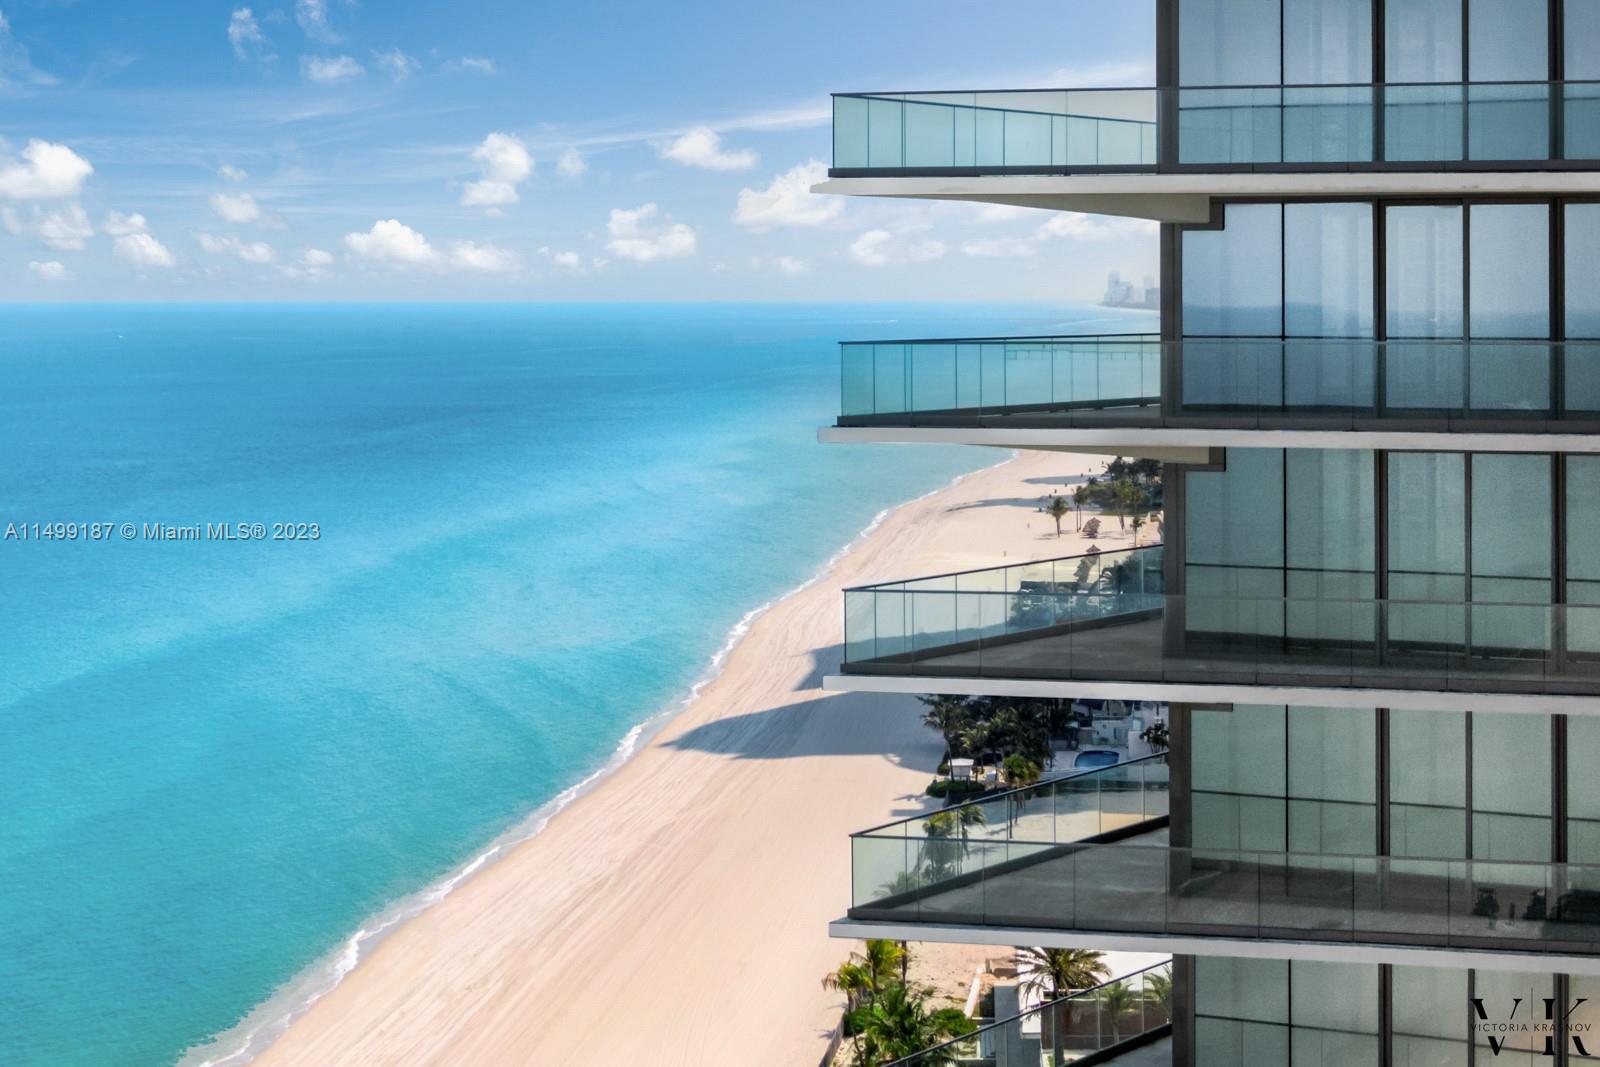 Gorgeous designer decorated turn-key 4 bedroom plus a Den, 5 1/2 bathrooms, 2 oversized balconies with breathtaking views of the ocean and inter coastal! A must see unit with Armani, Fendi and other designer finishes! Built-ins through out the unit. The building offers a spa, fitness center, movie theater, hair and nail salon, cigar room, wine room, game room and an Armani restaurant.